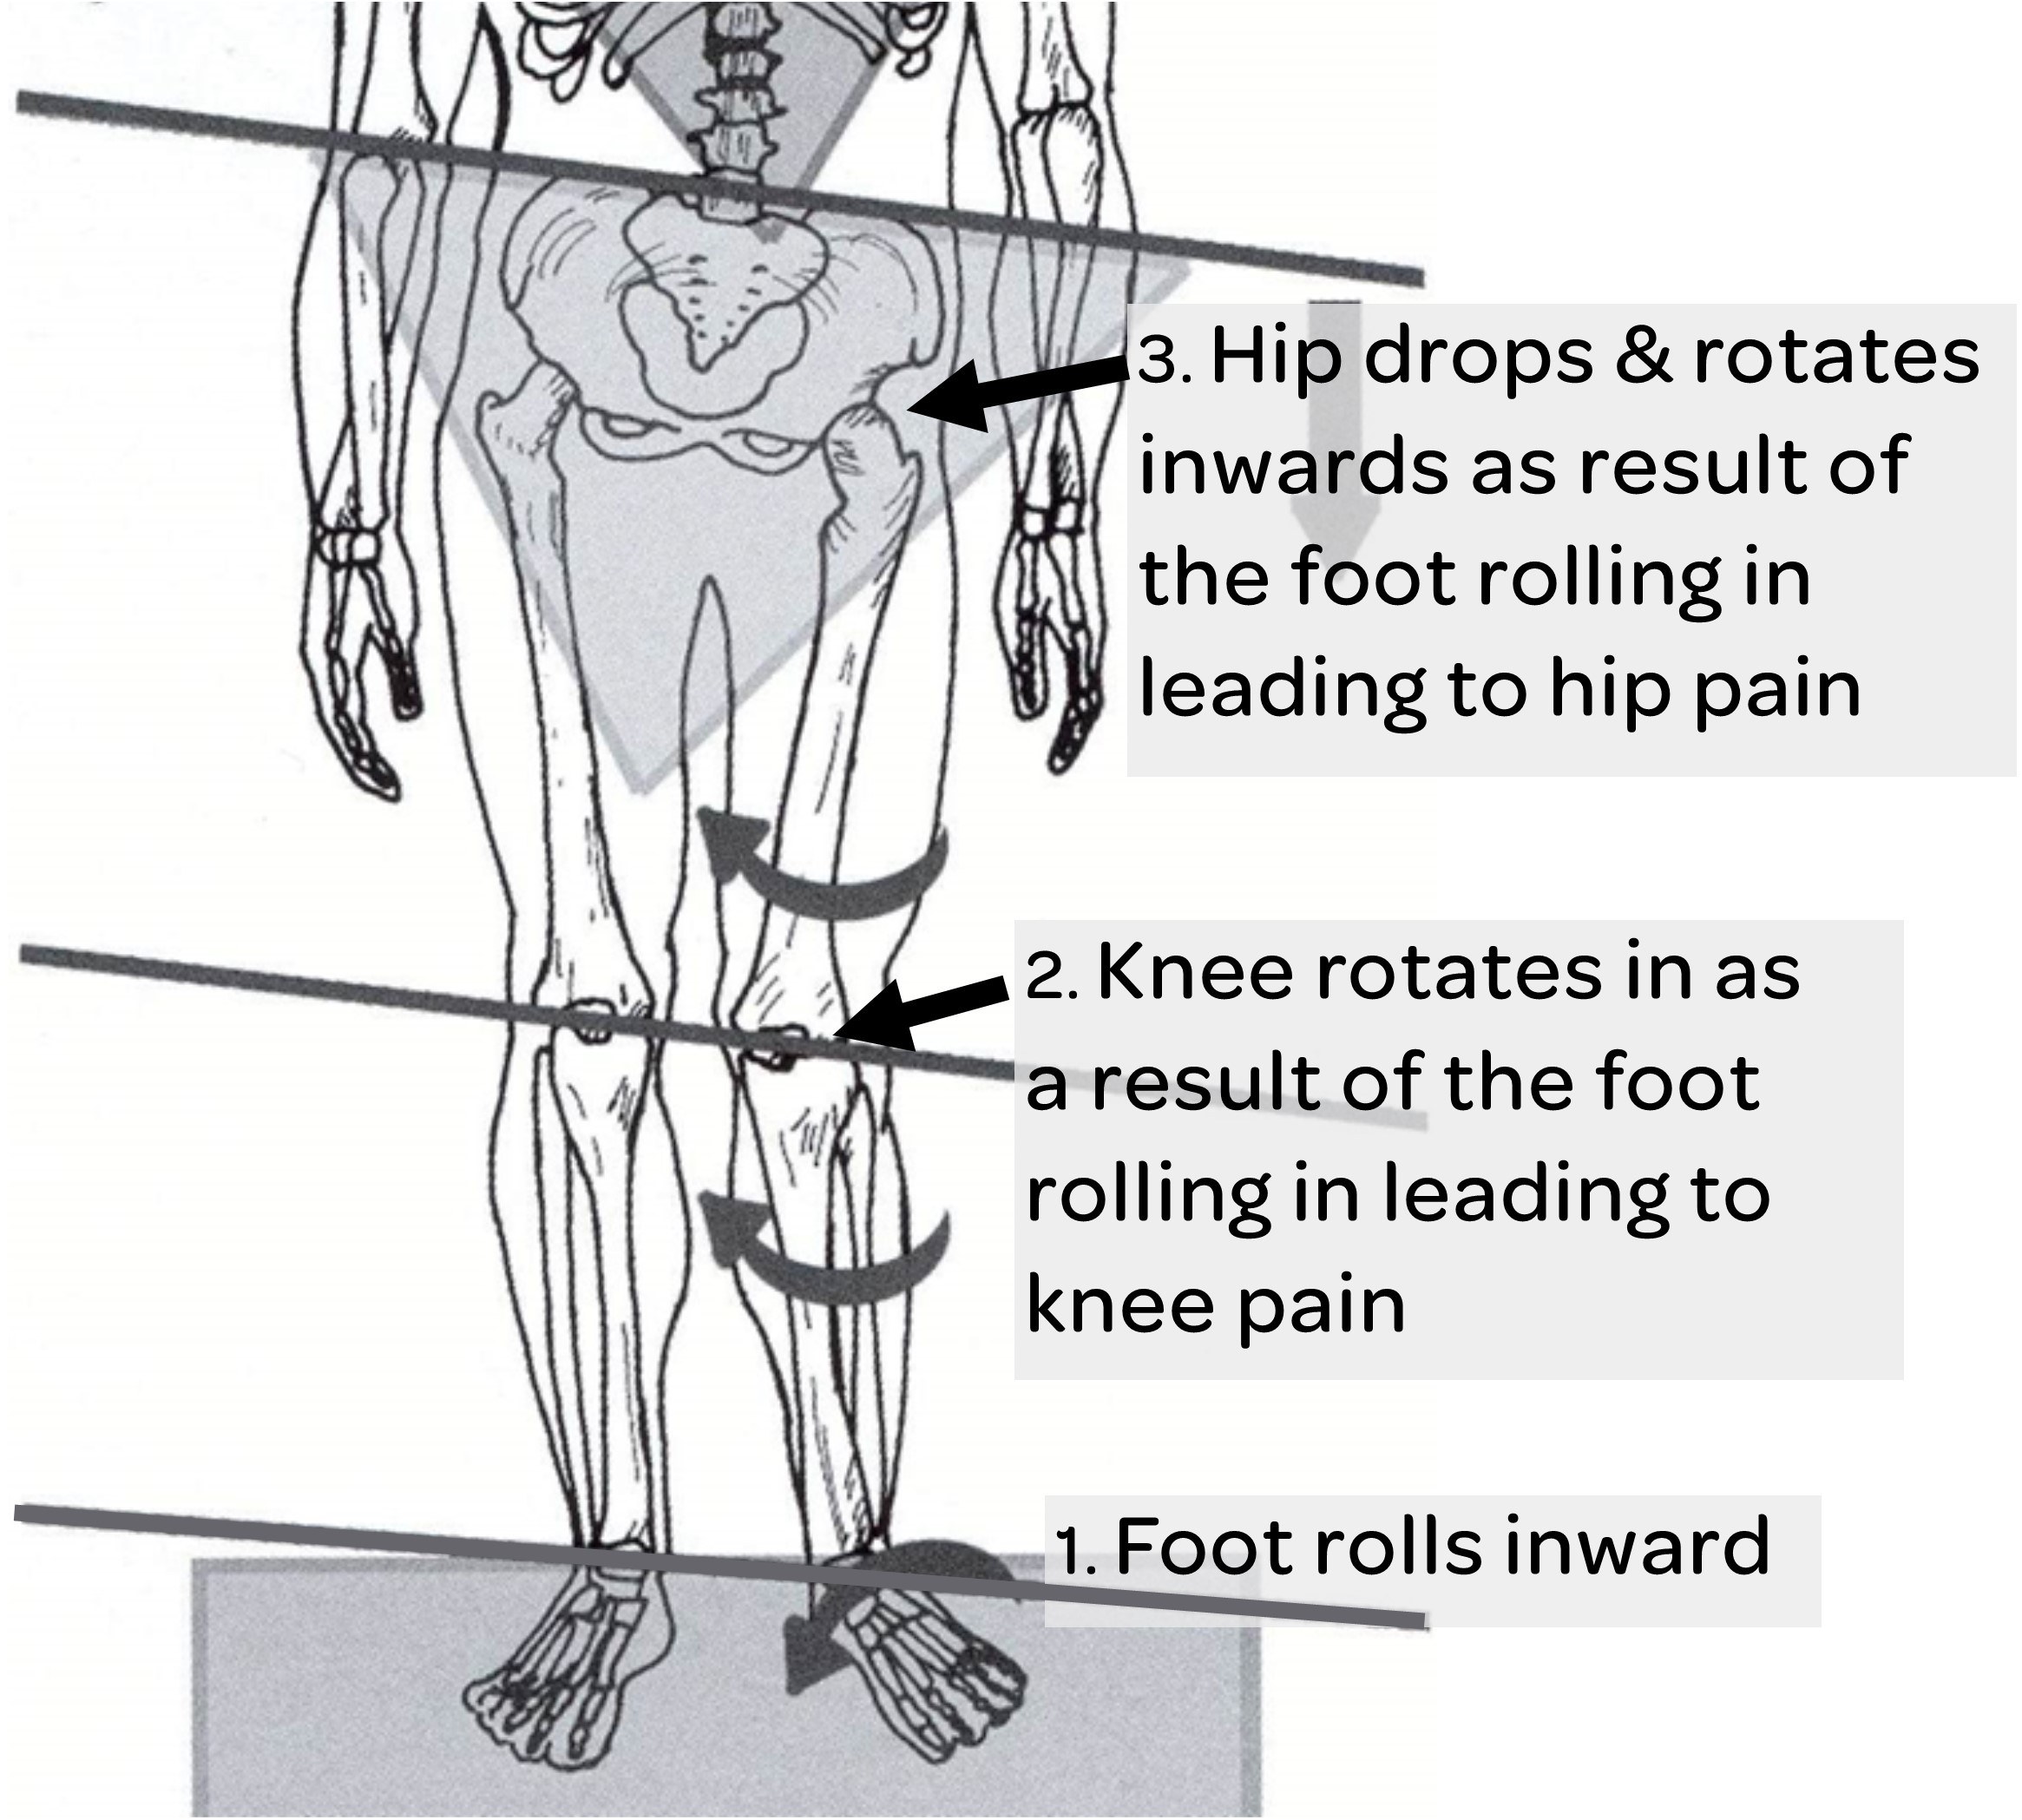 Knee pain can be caused when the foot rolls inwards or pronates. This leads to strain on the knee joint